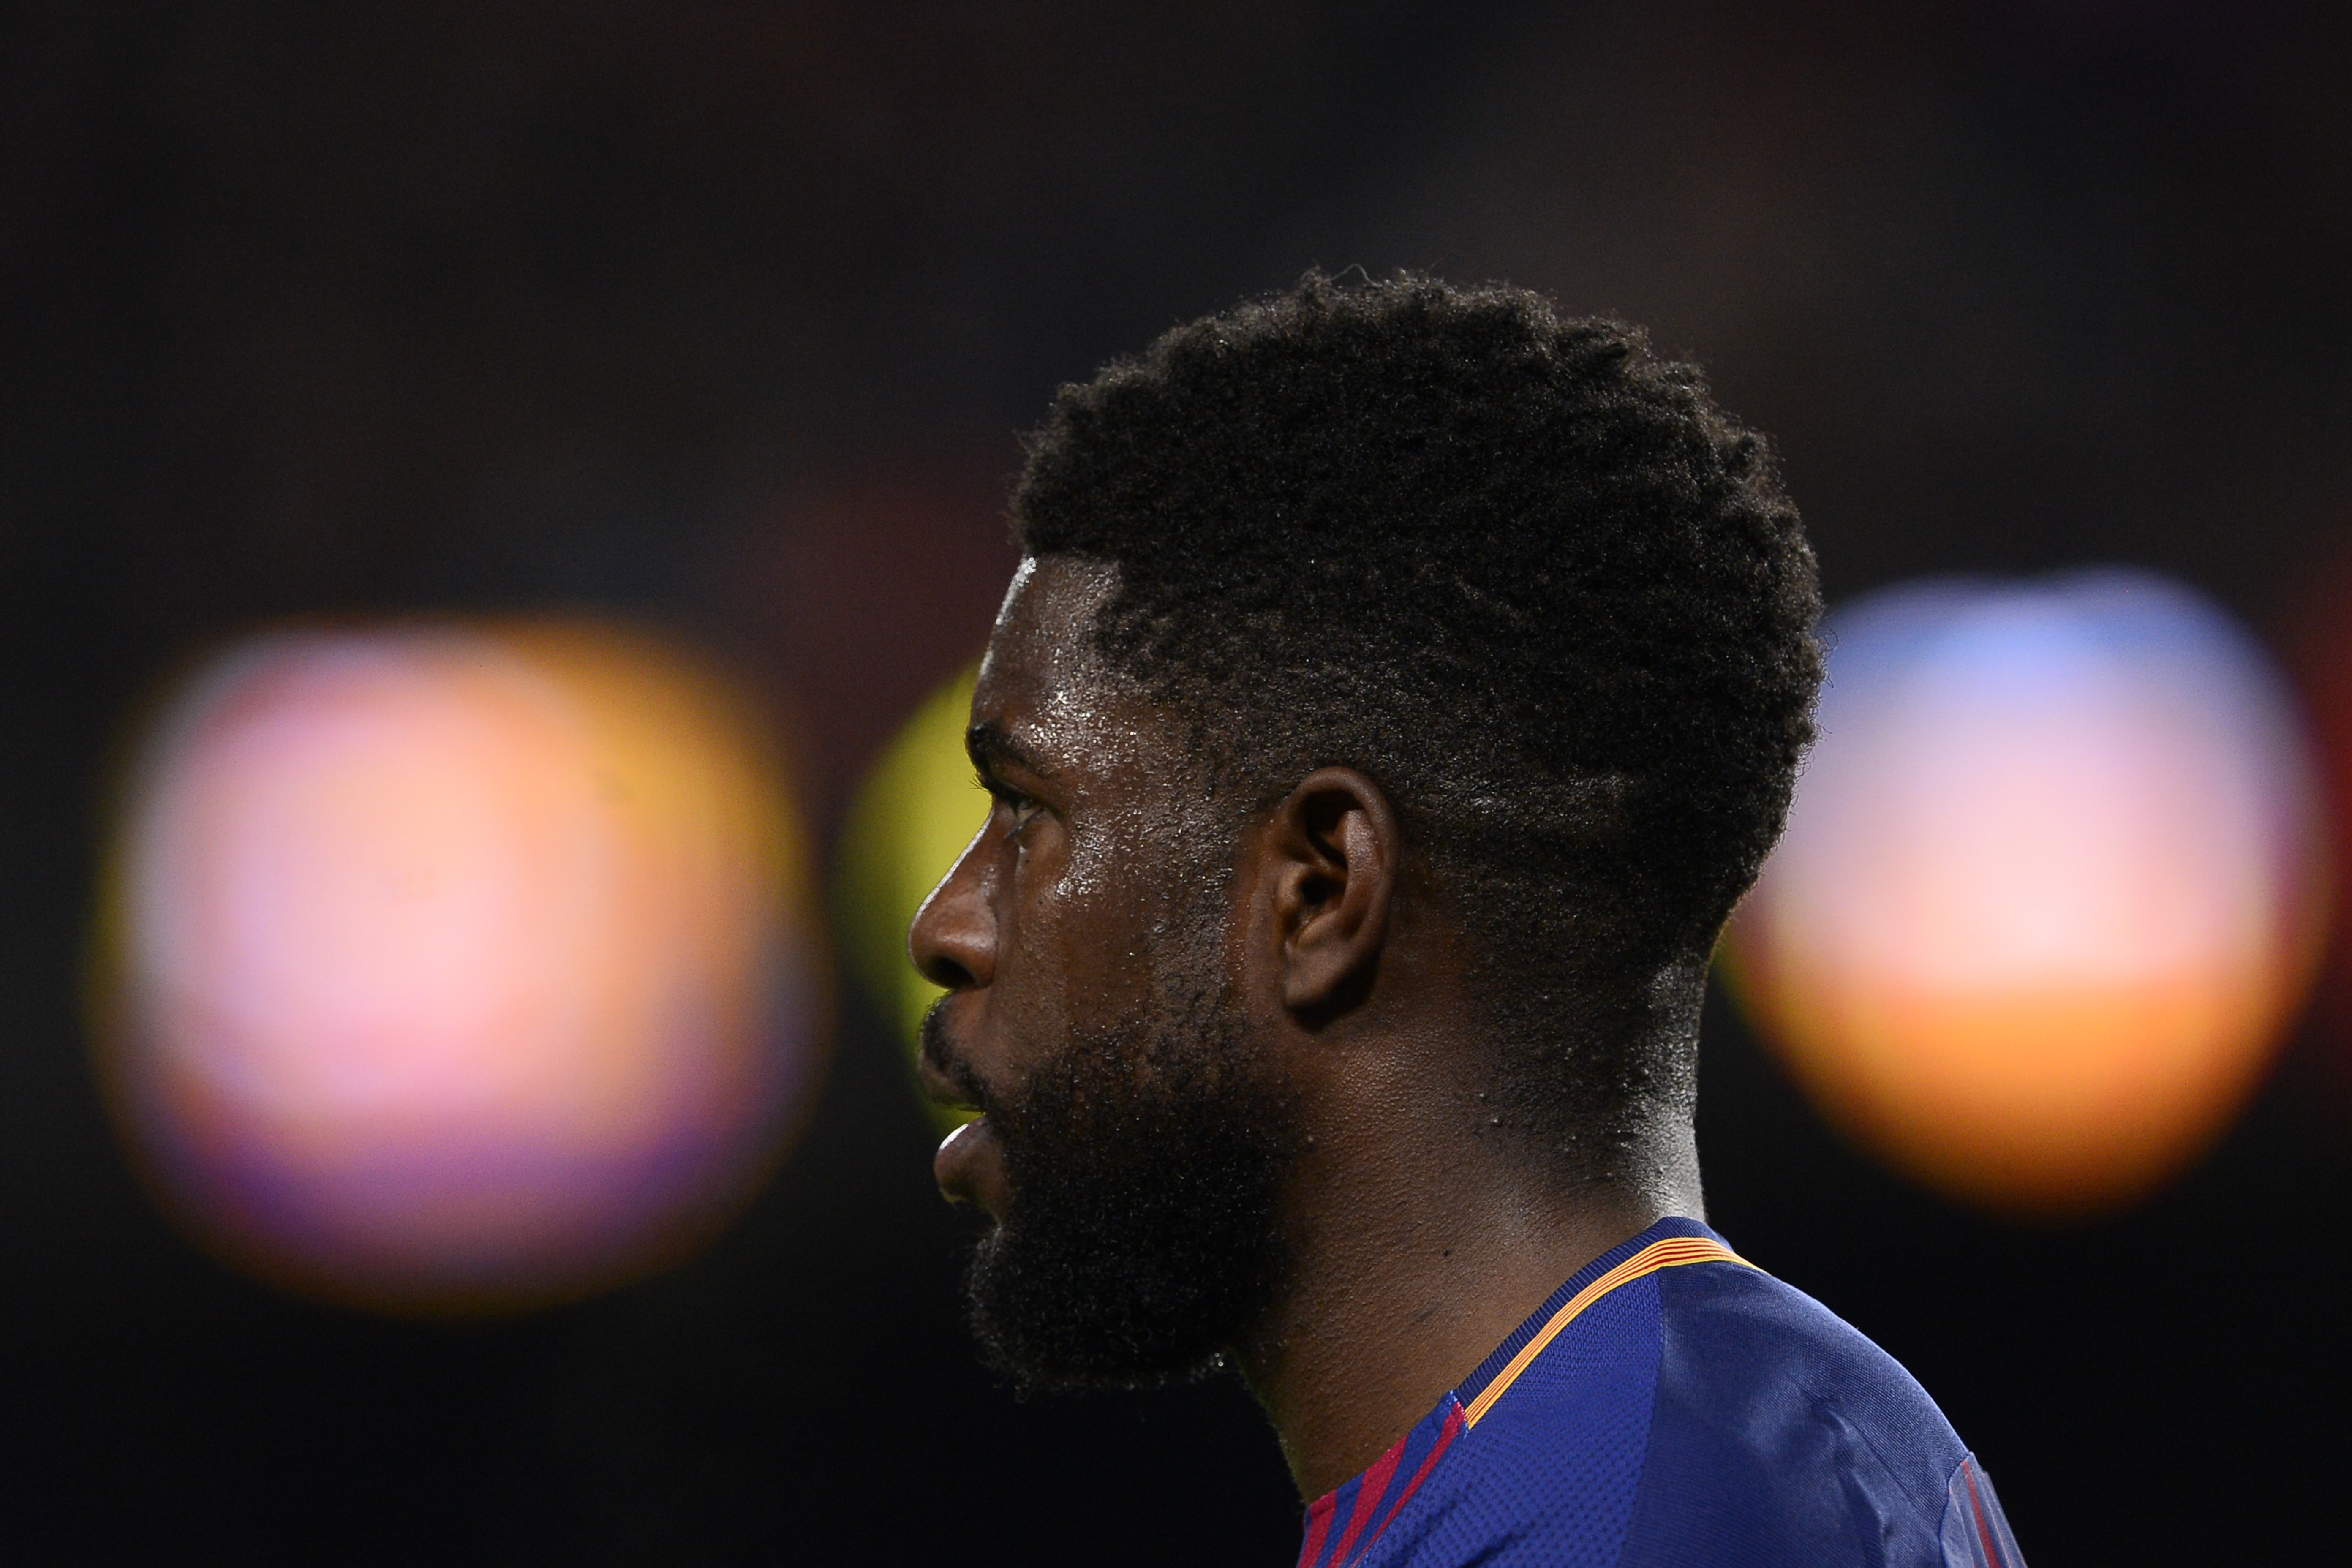 Barcelona's French defender Samuel Umtiti reacts during the Spanish 'Copa del Rey' (King's cup) first leg semi-final football match between FC Barcelona and Valencia CF at the Camp Nou stadium in Barcelona on February 01, 2018. / AFP PHOTO / Josep LAGO        (Photo credit should read JOSEP LAGO/AFP/Getty Images)